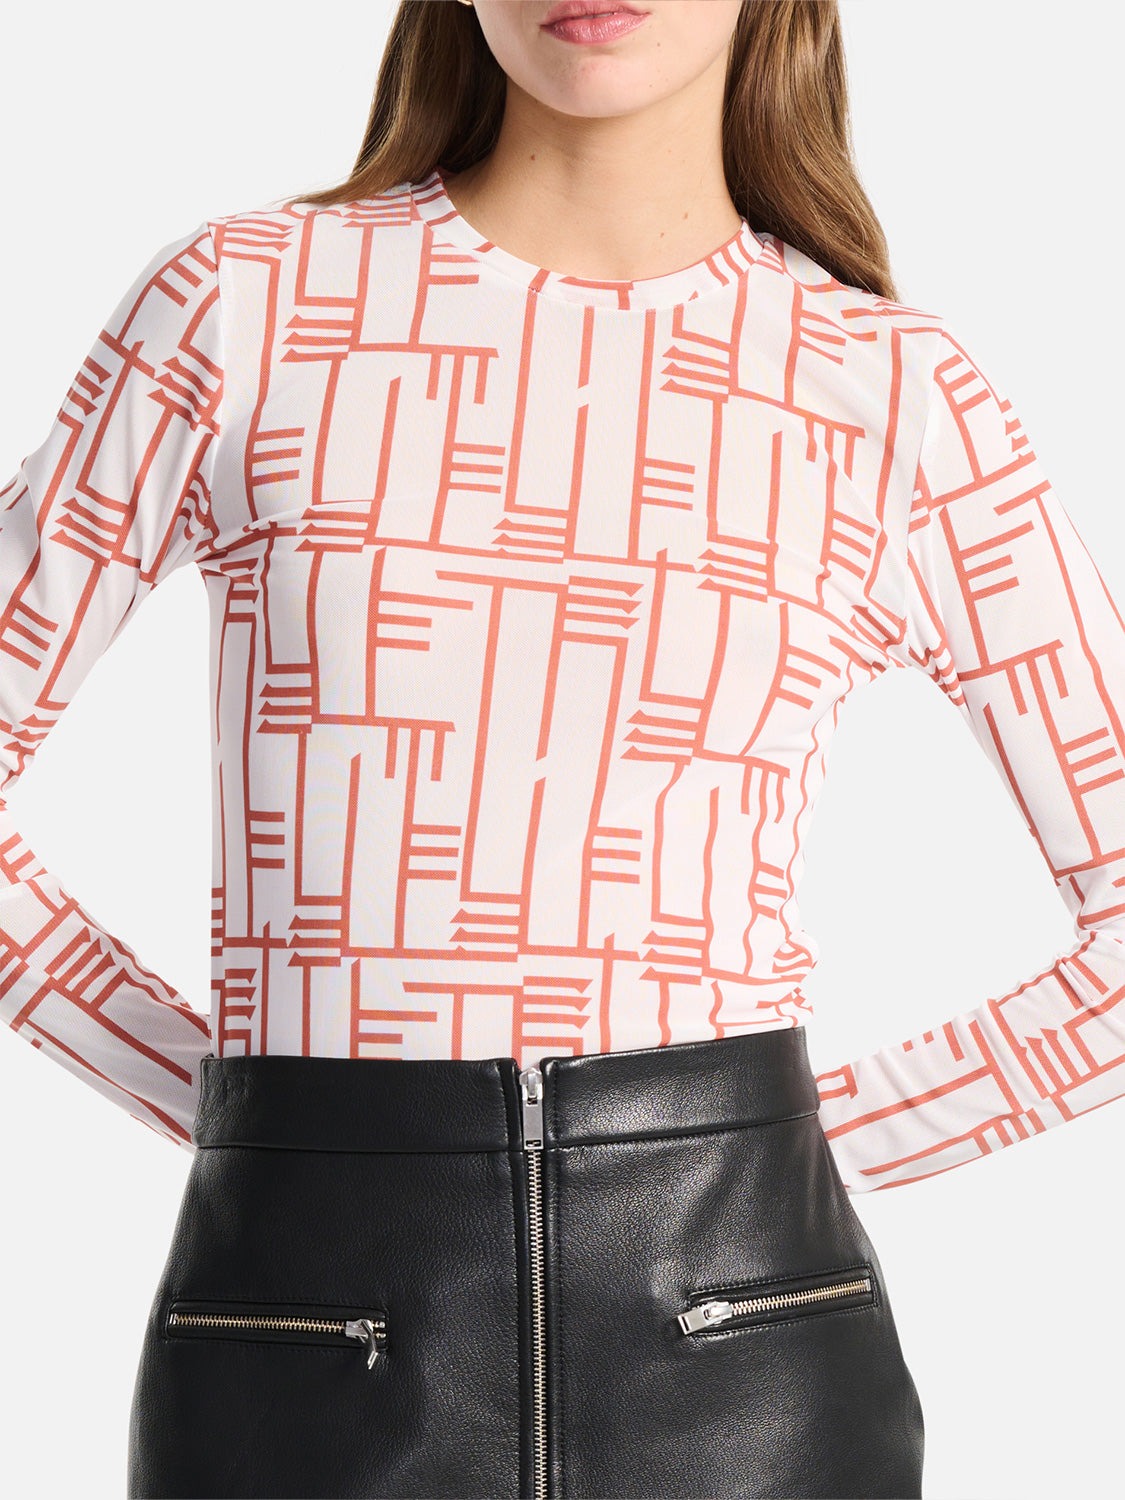 ENA PELLY | WILLOW MESH TOP - RED BRICK